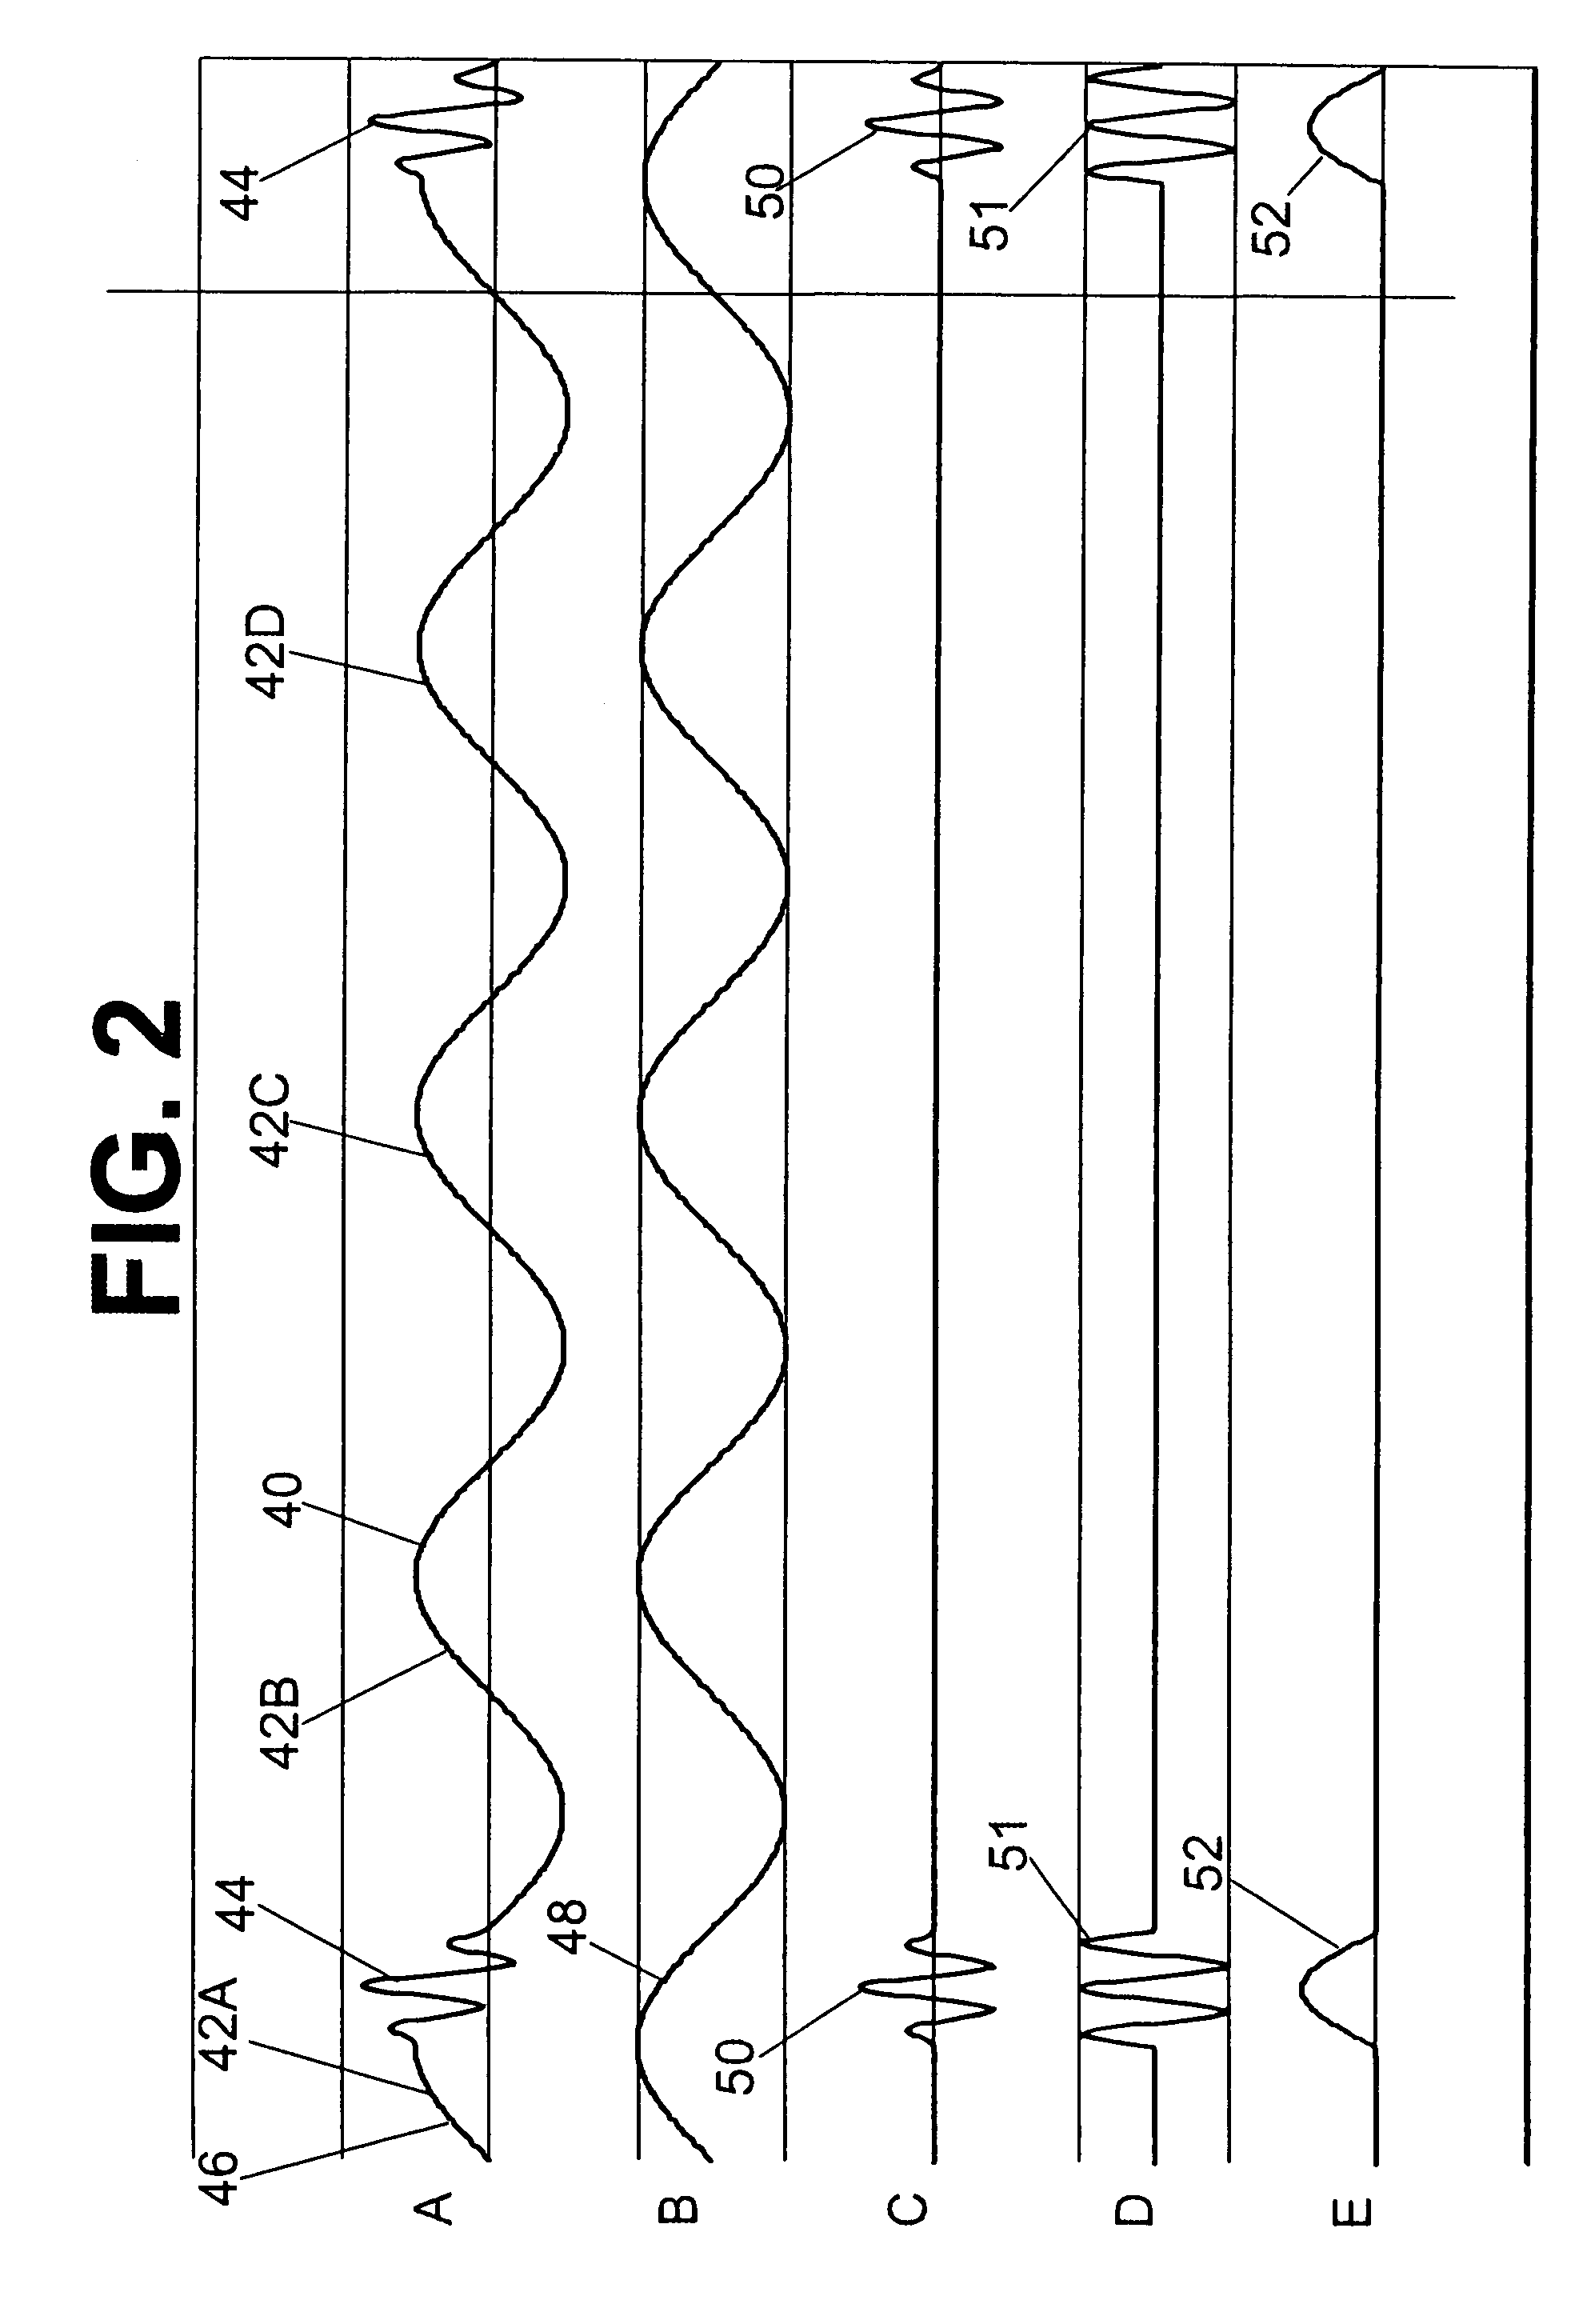 Audio signal phase detection system and method